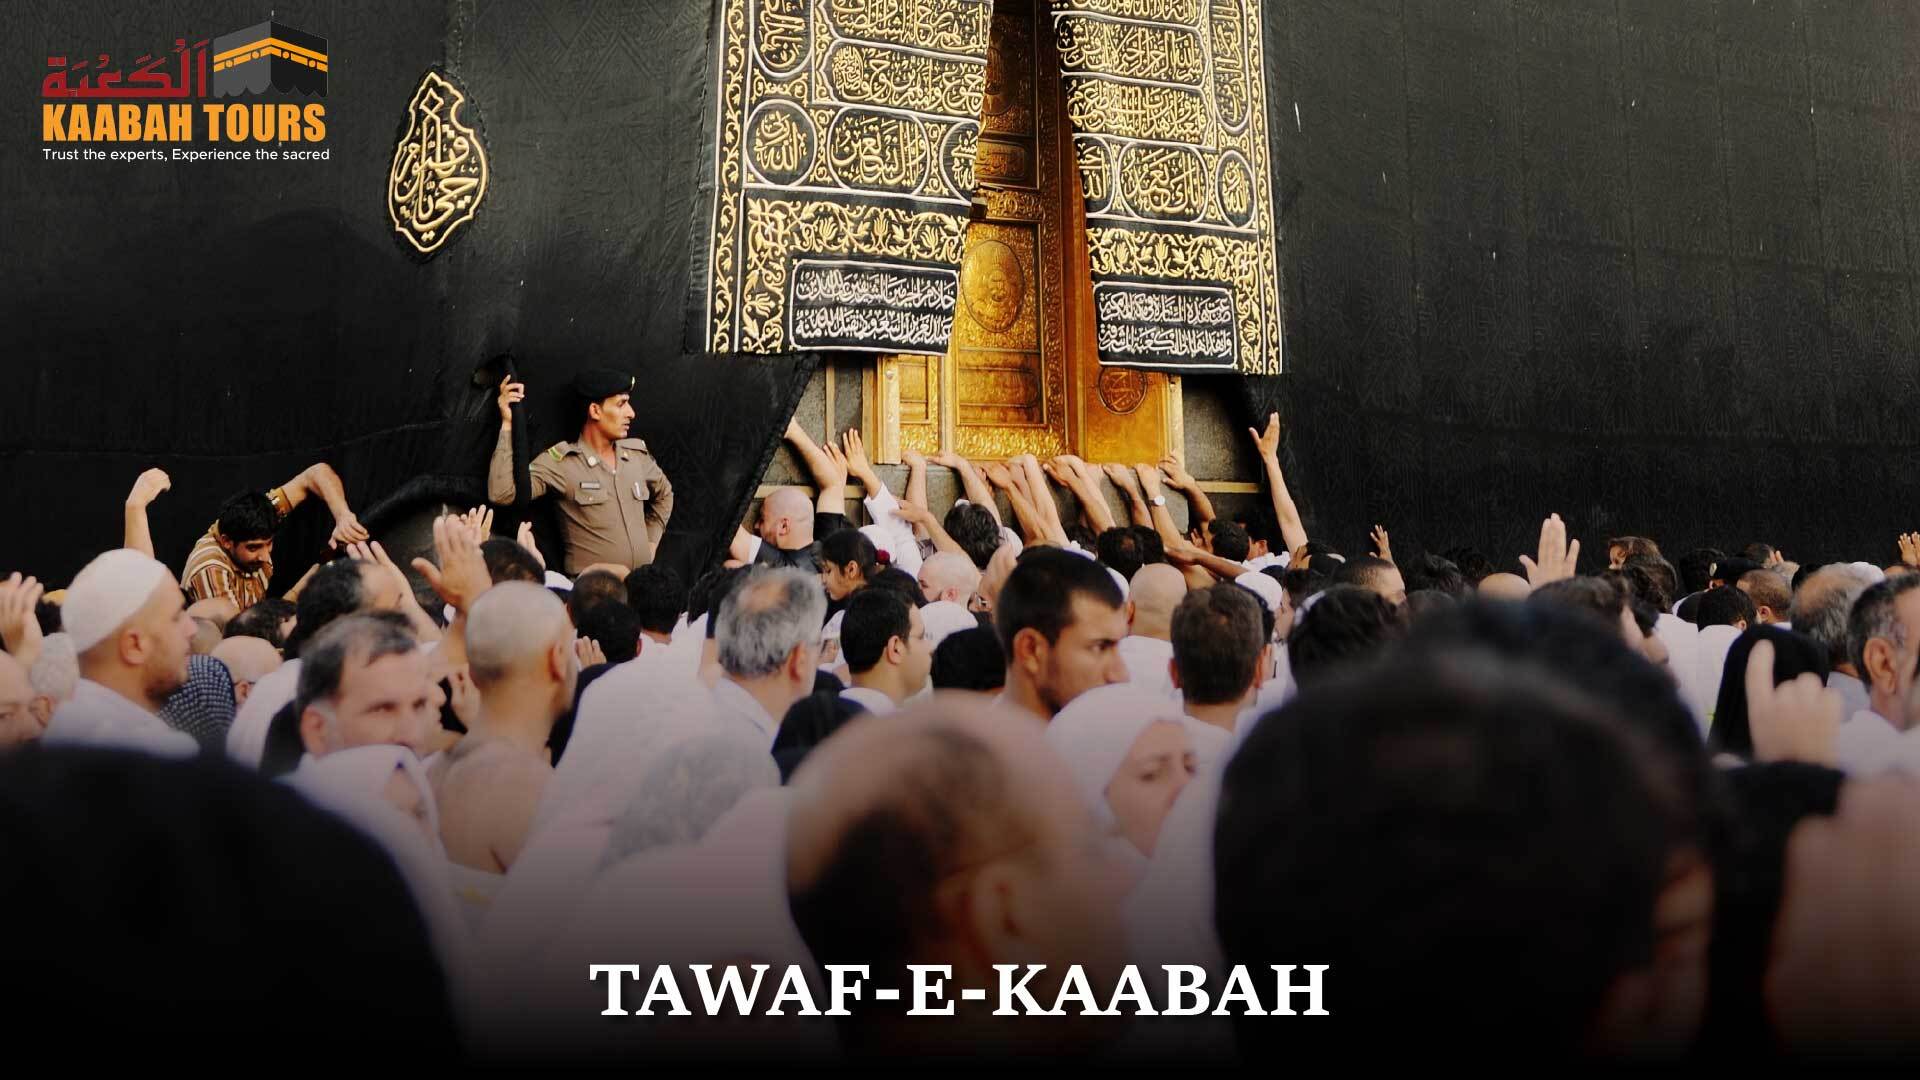 What is Tawaf?